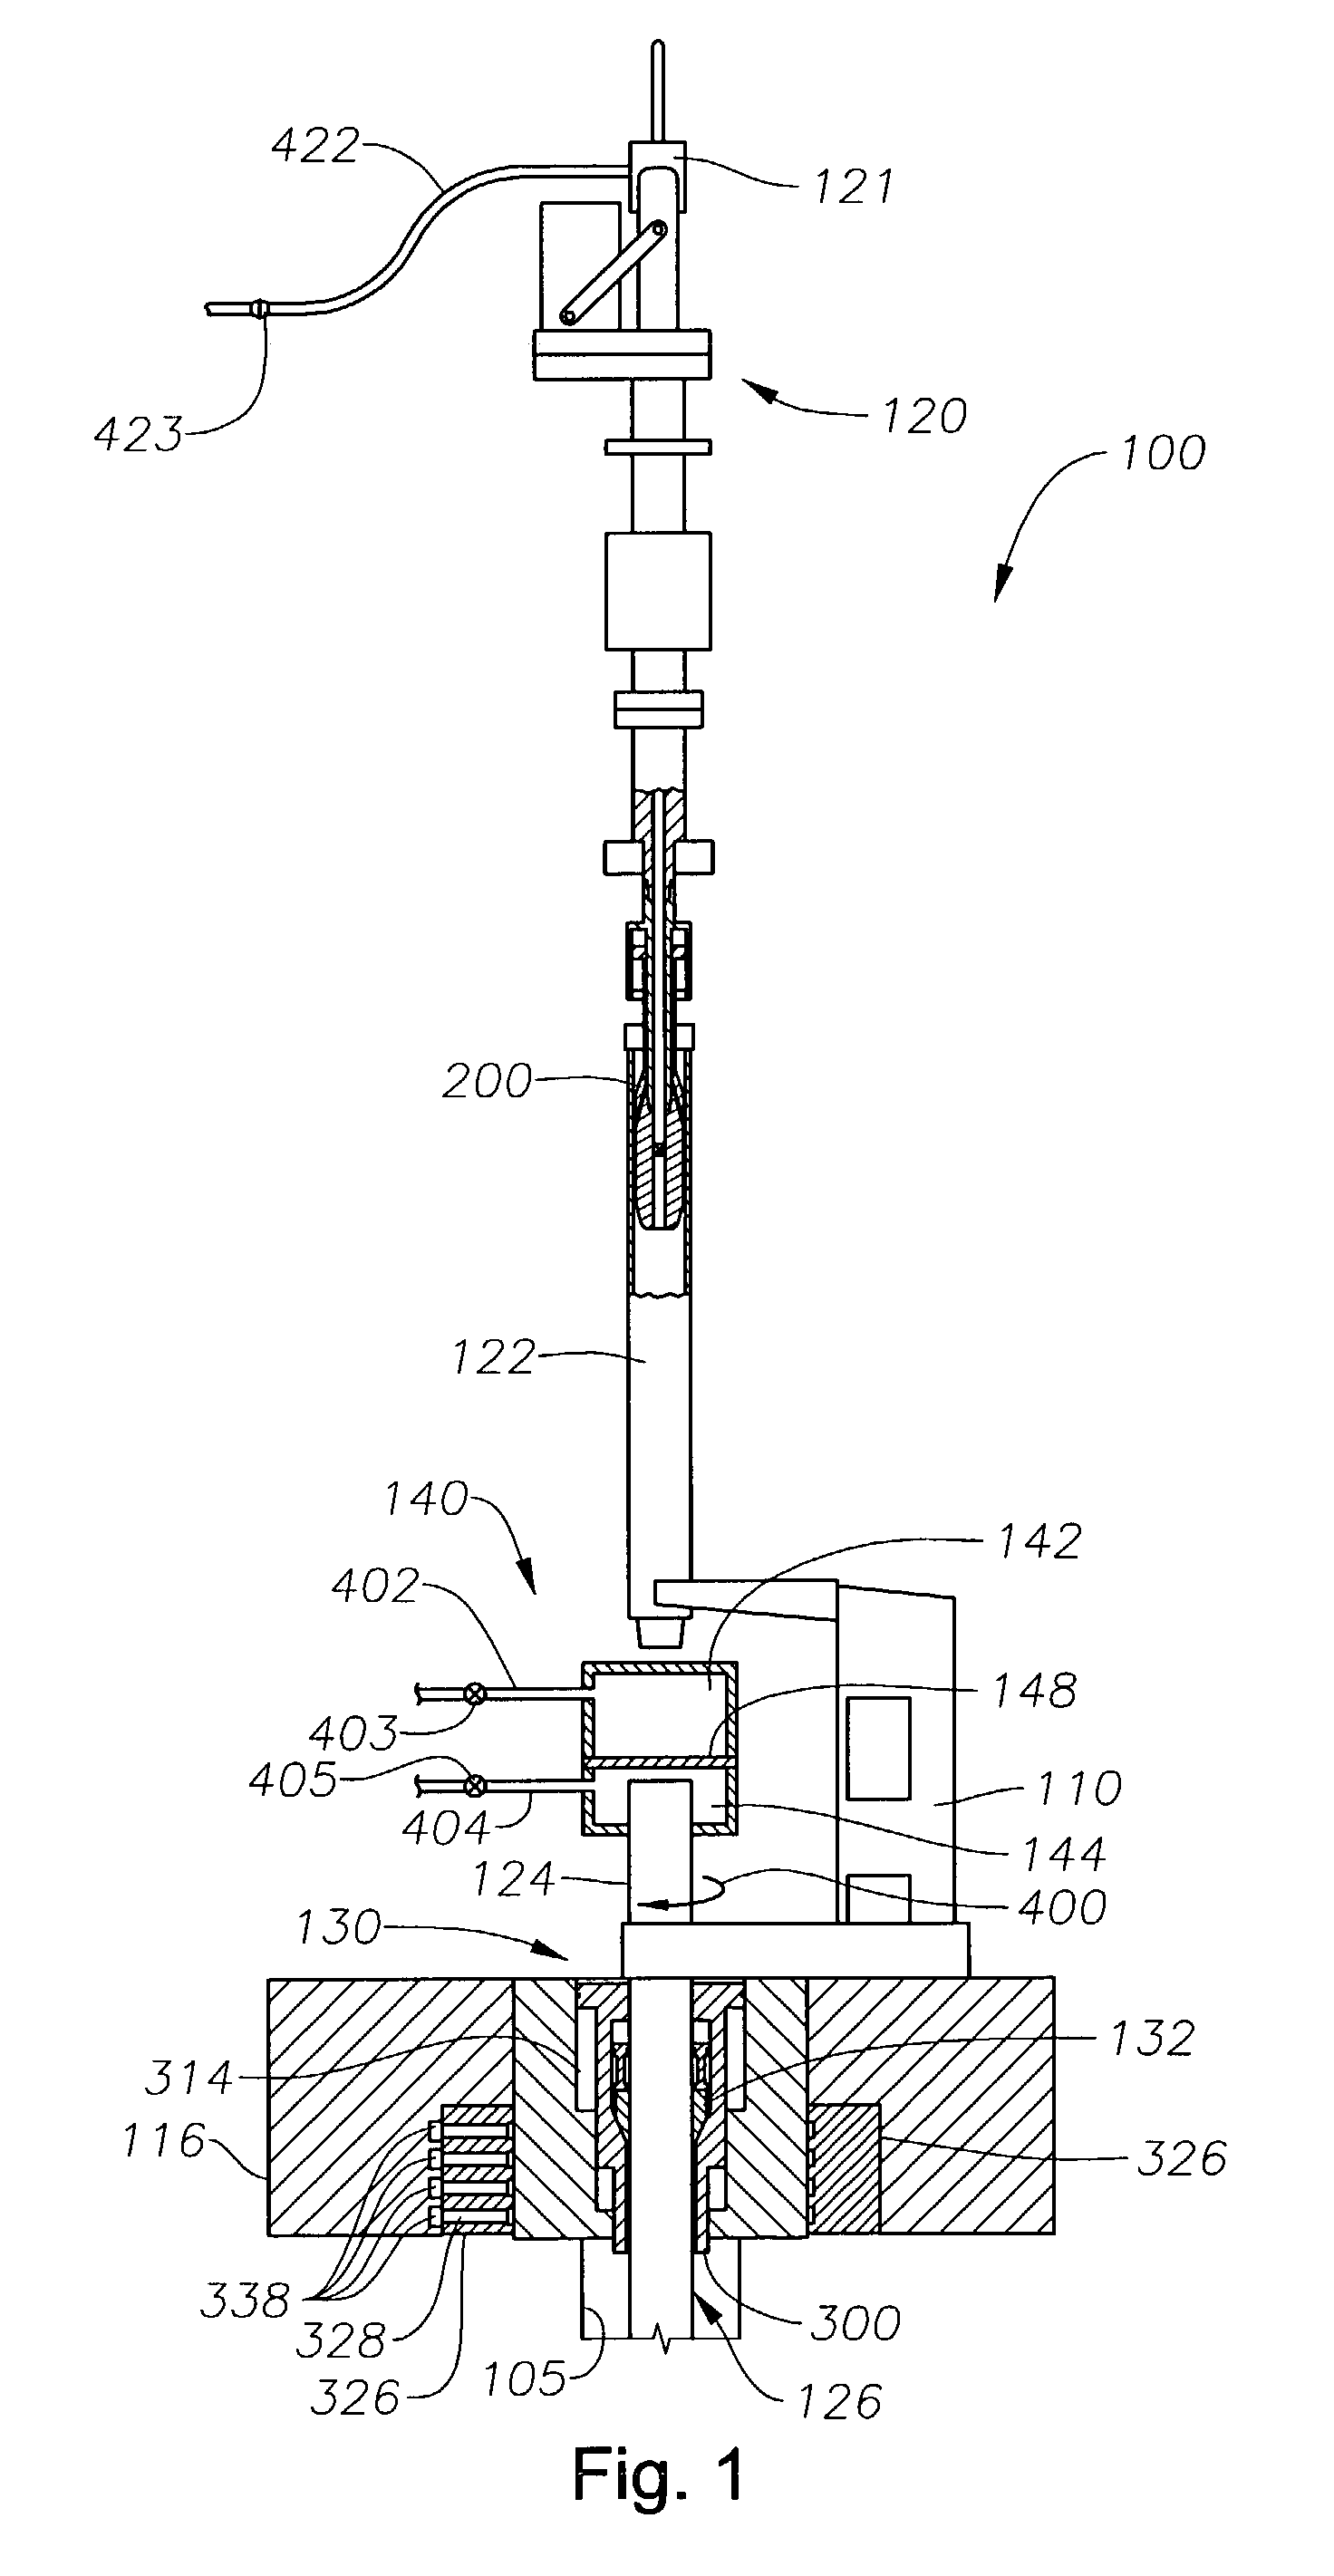 Methods and apparatus for connecting tubulars while drilling